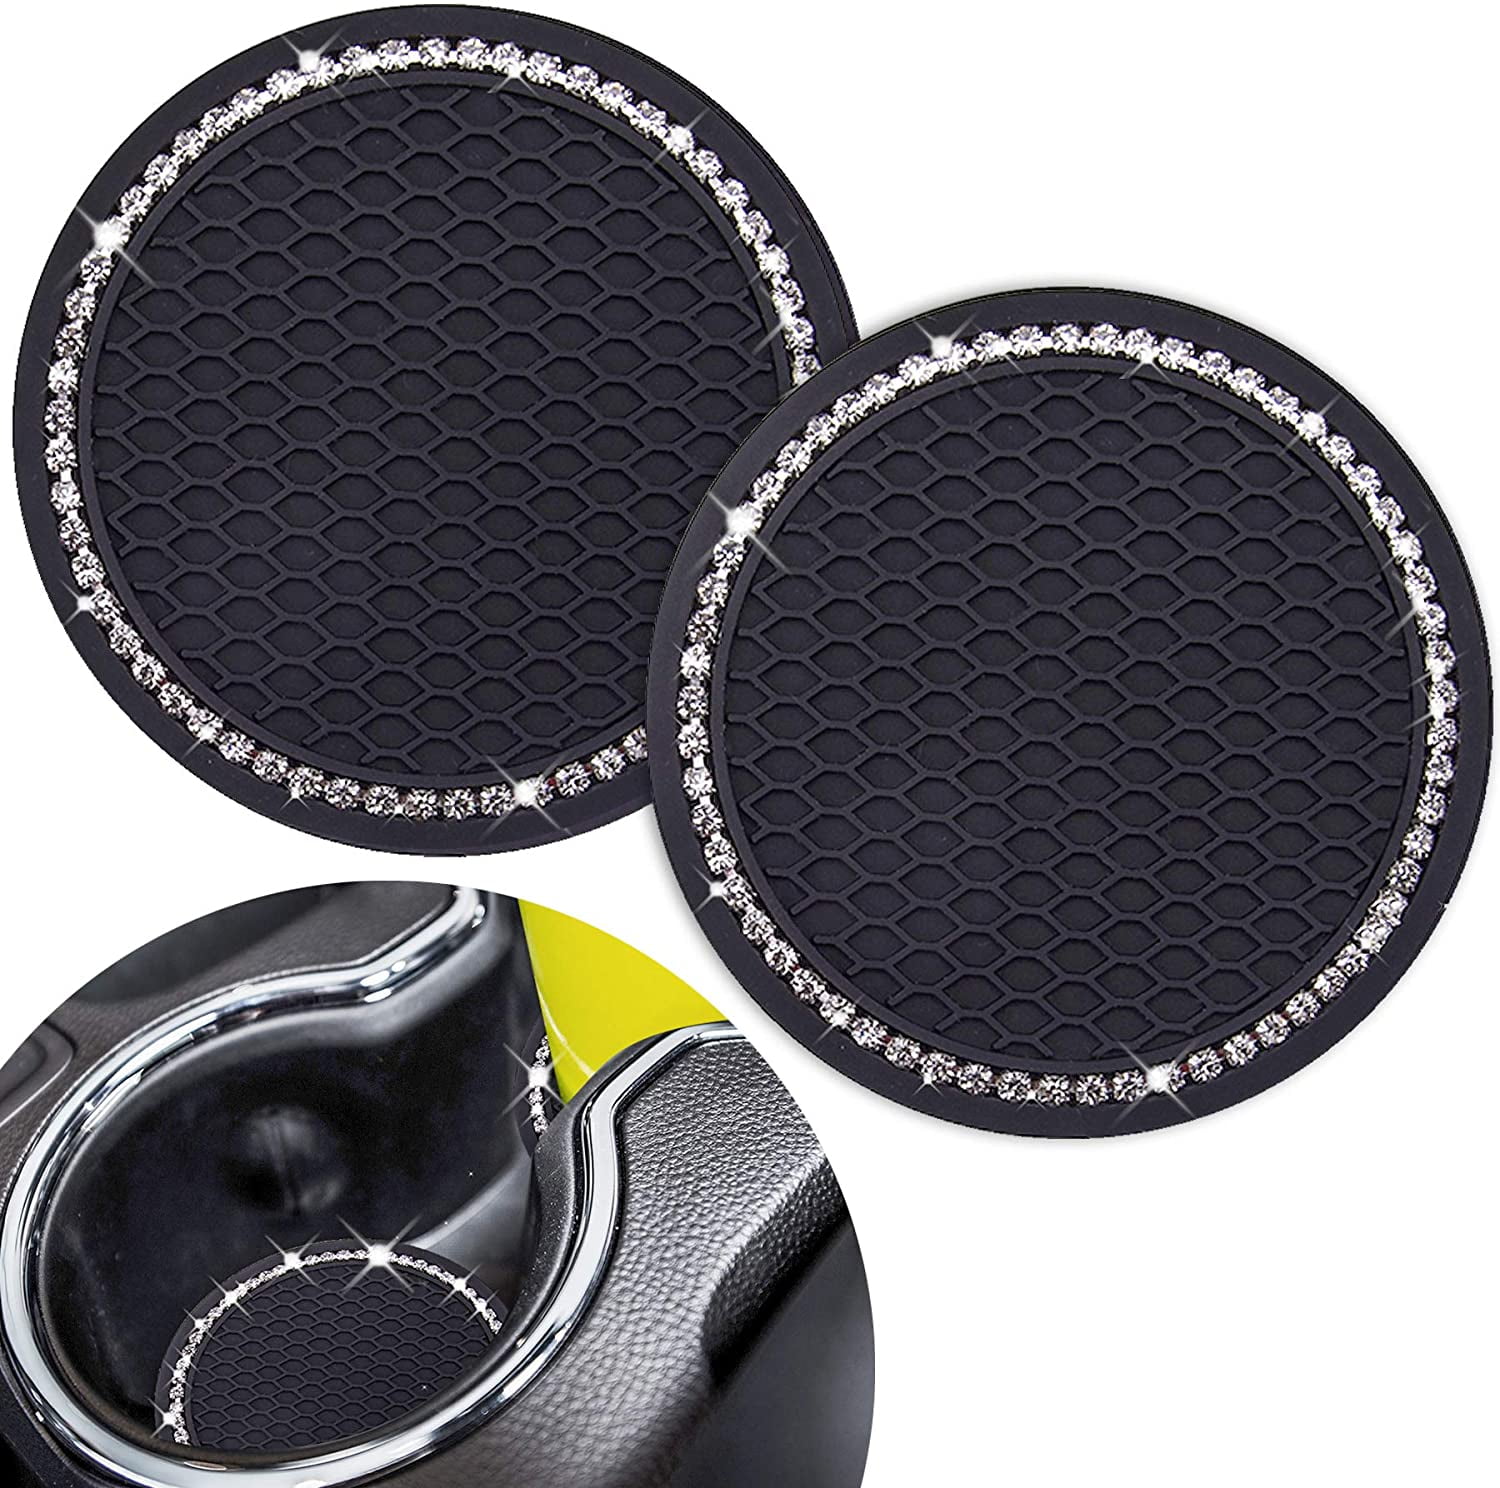 2.75 Inch Auto Car Cup Holder Insert Coasters Silicone Anti-Slip Crystal Rhinestone Drink Car Cup Mat Black Universal Vehicle Interior Accessories for Women Girls 2PCS Bling Car Cup Coaster 